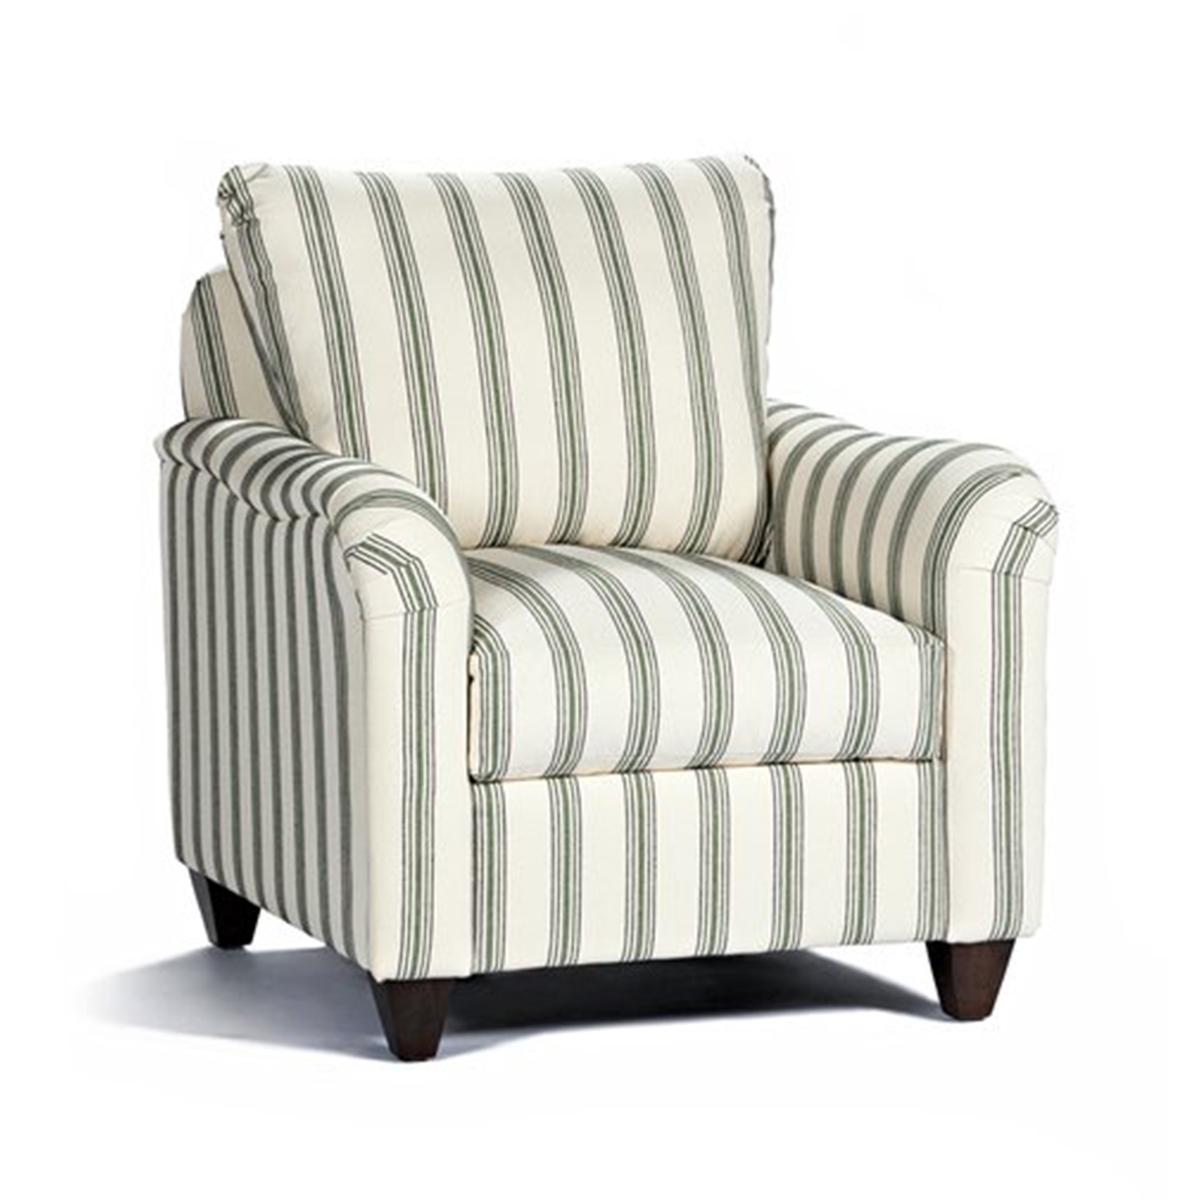 *Marshfield Simply Yours Chair Was $1000.00 NOW: $499.99